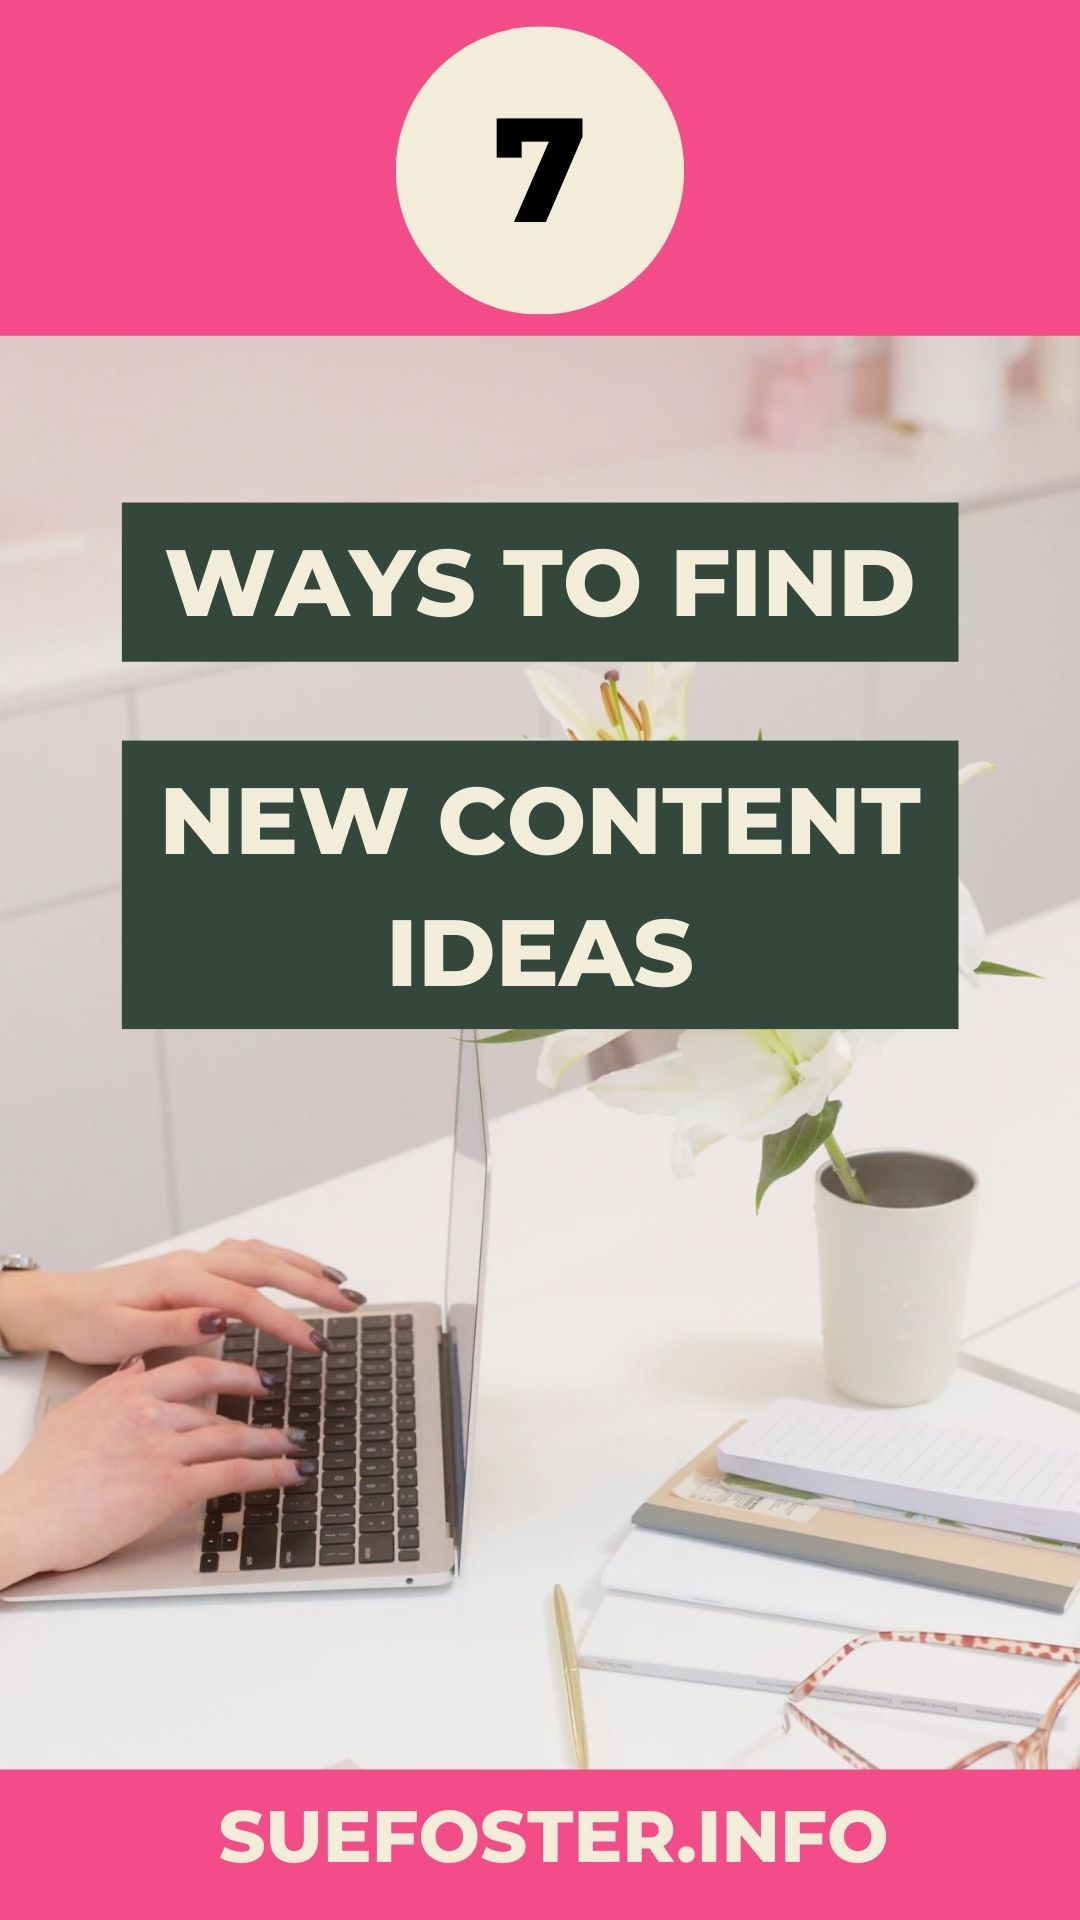 7 ways to find new content ideas.